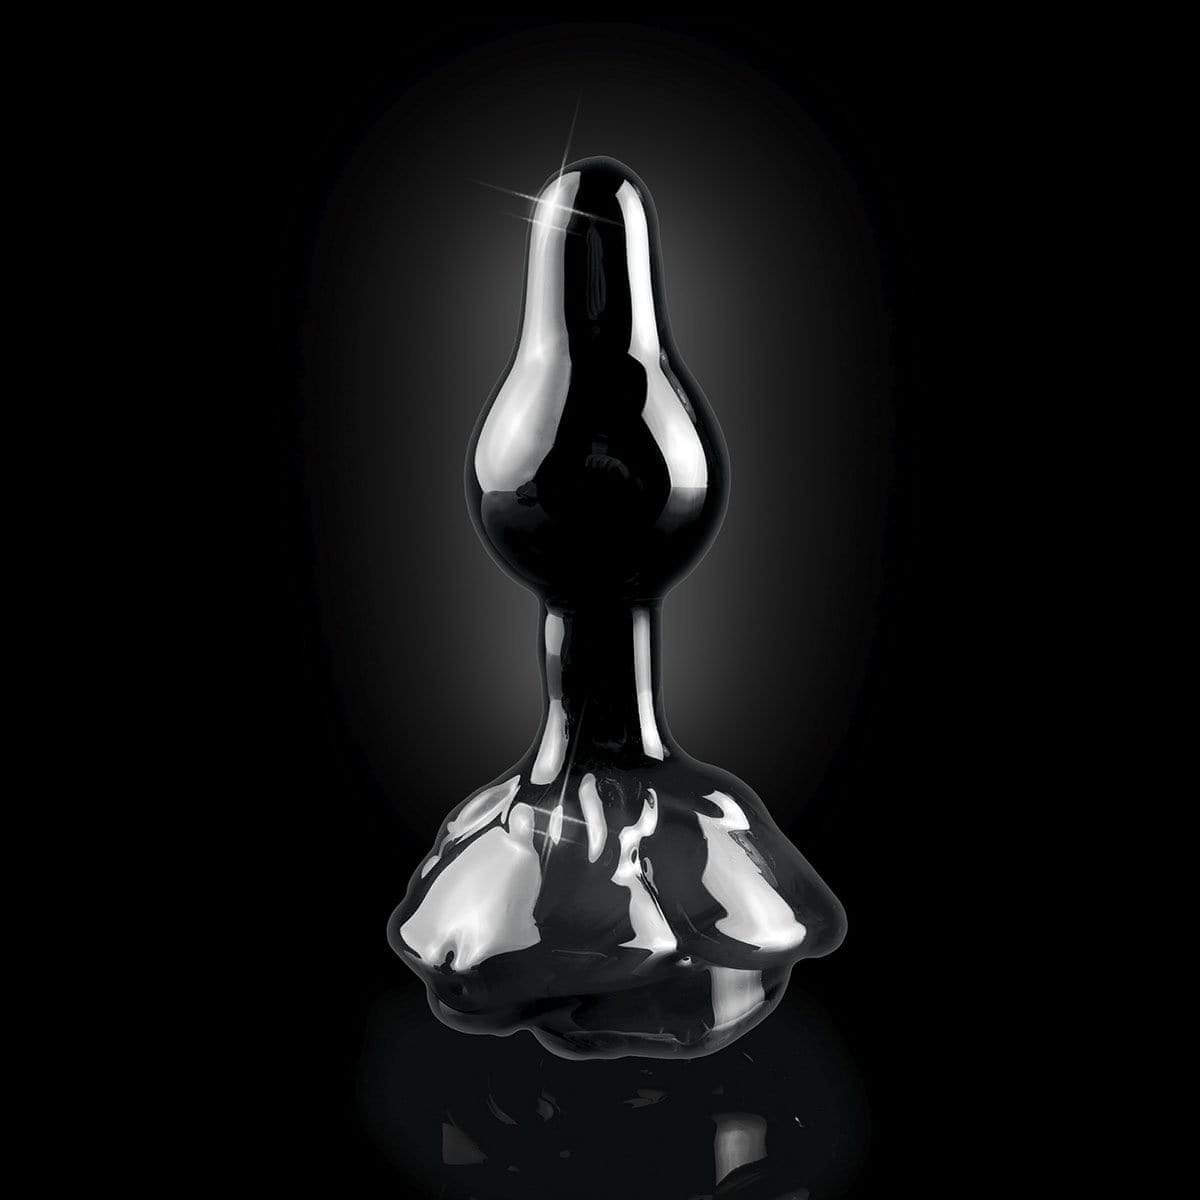 Icicles No. 77 Black Glass Wand Plug - Thorn & Feather